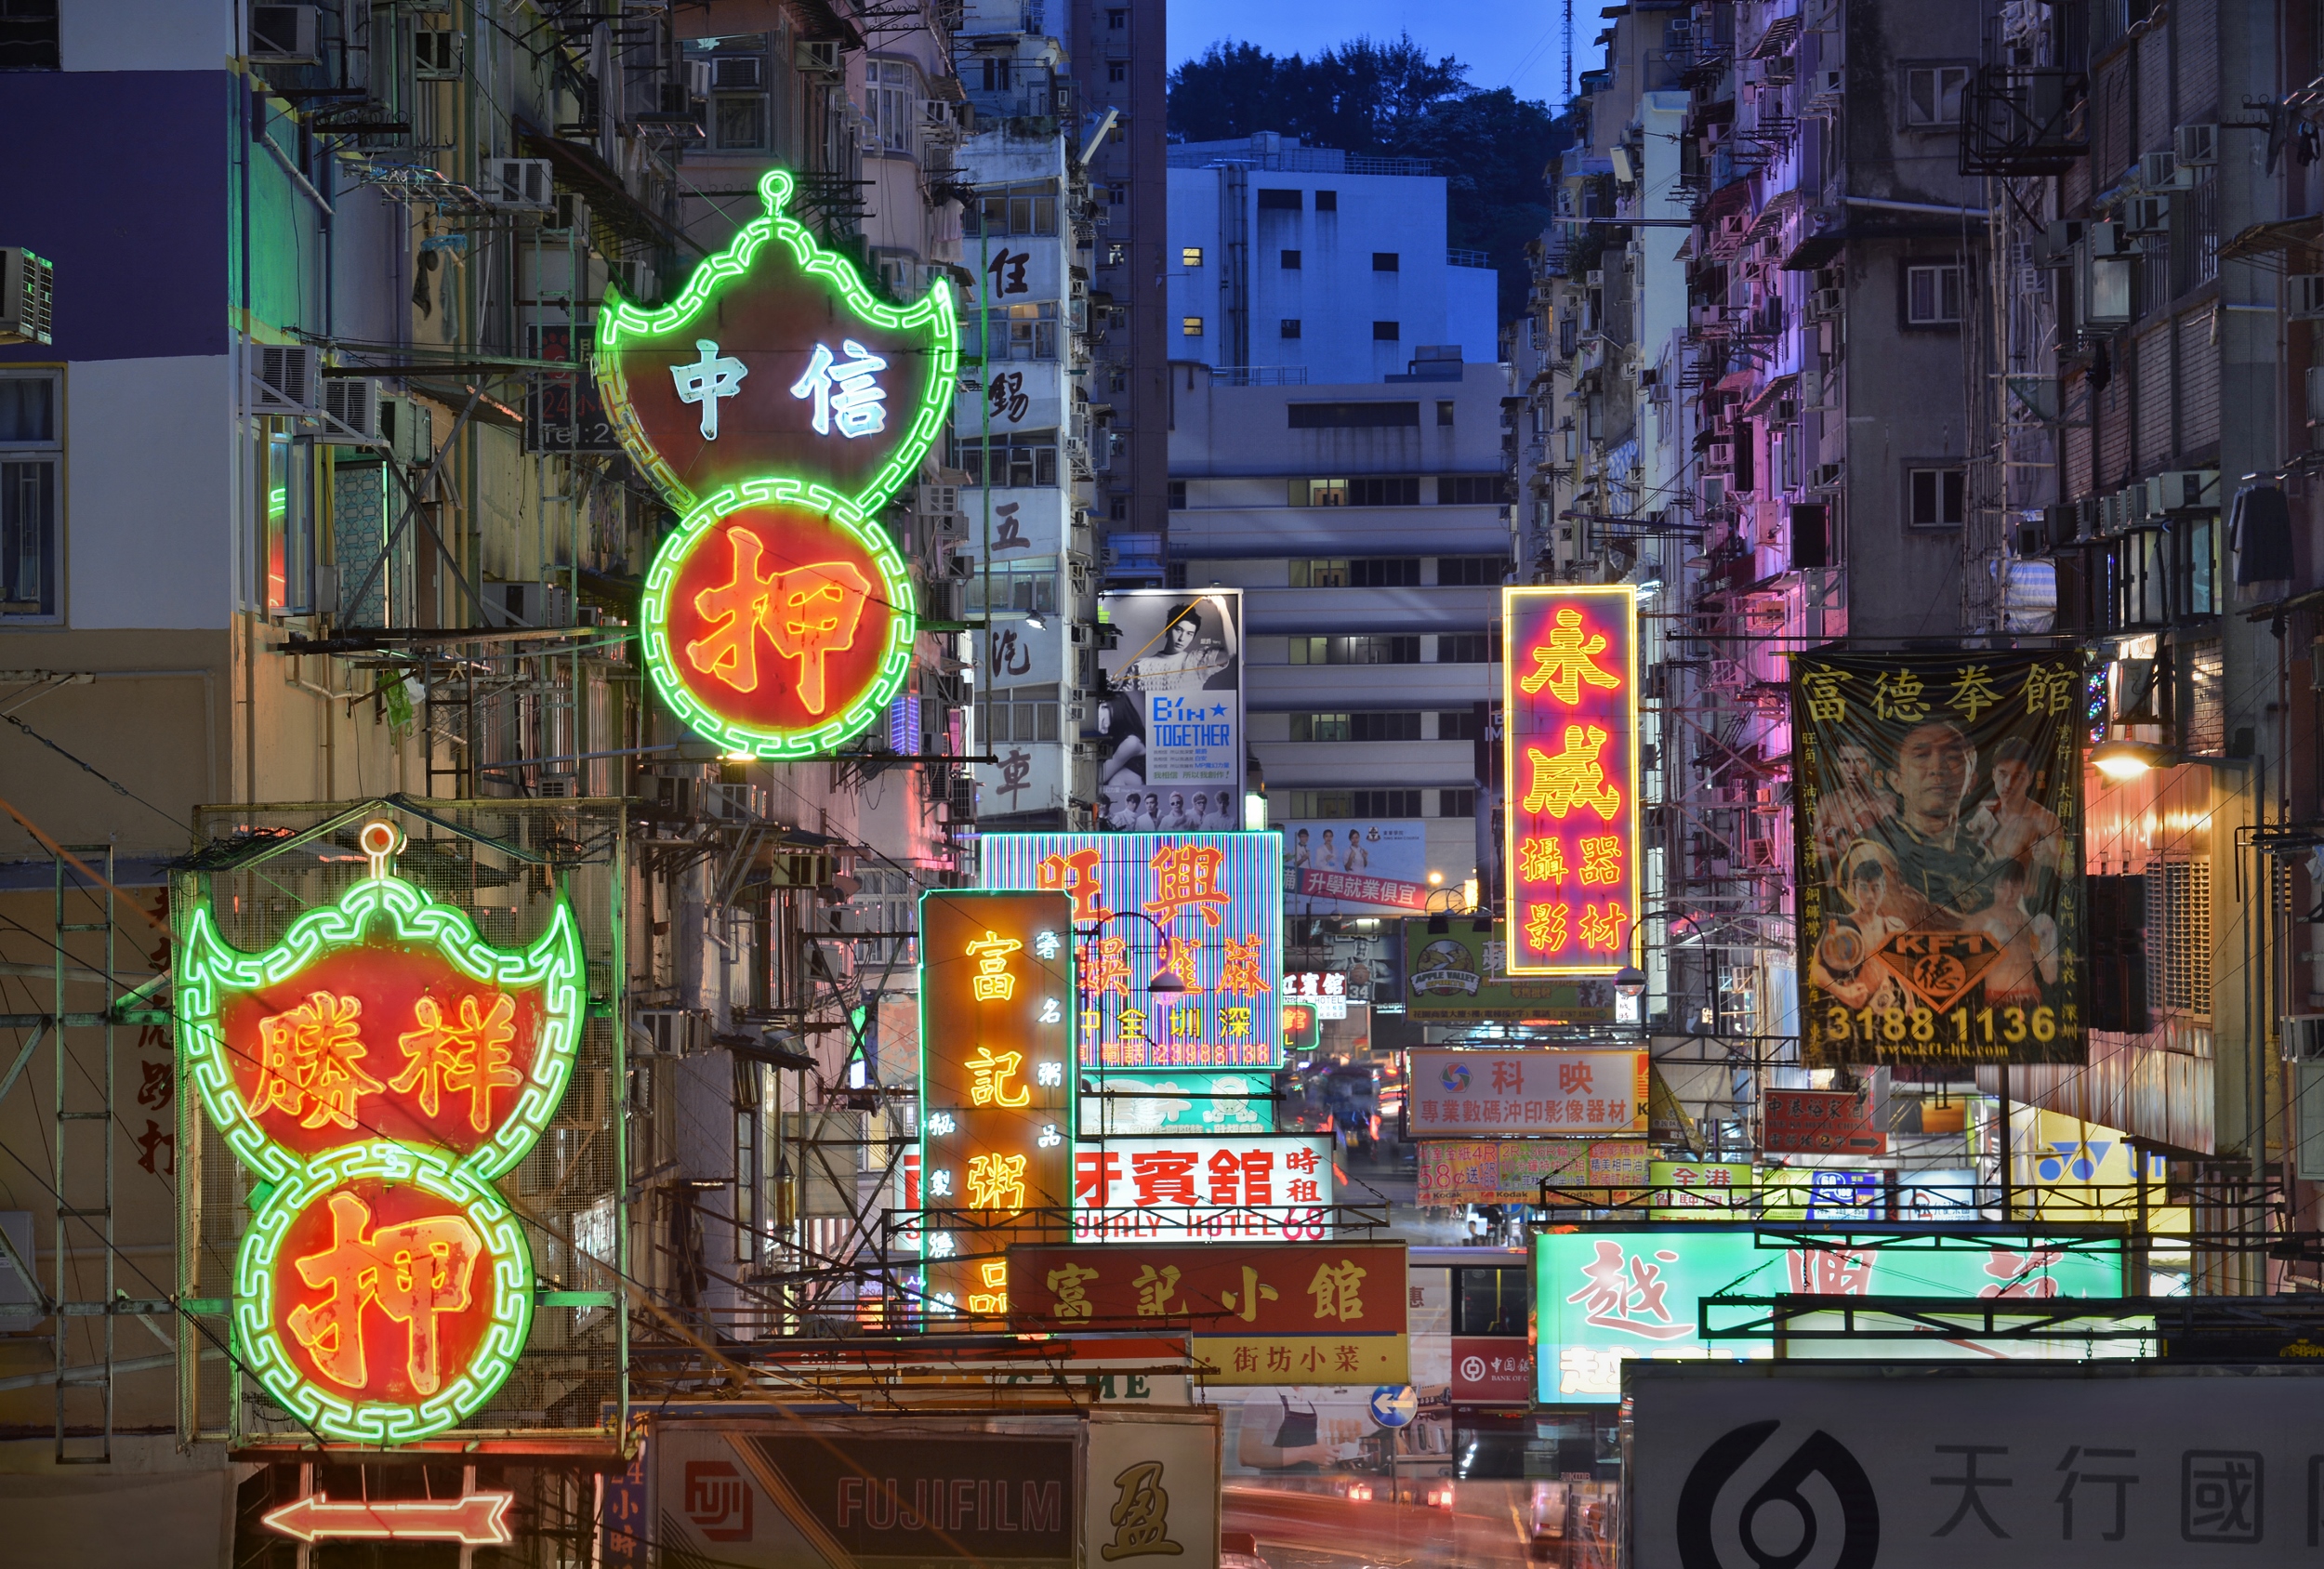 Hong Kong is Losing its Identity, One Neon Light at a Time. - RICE